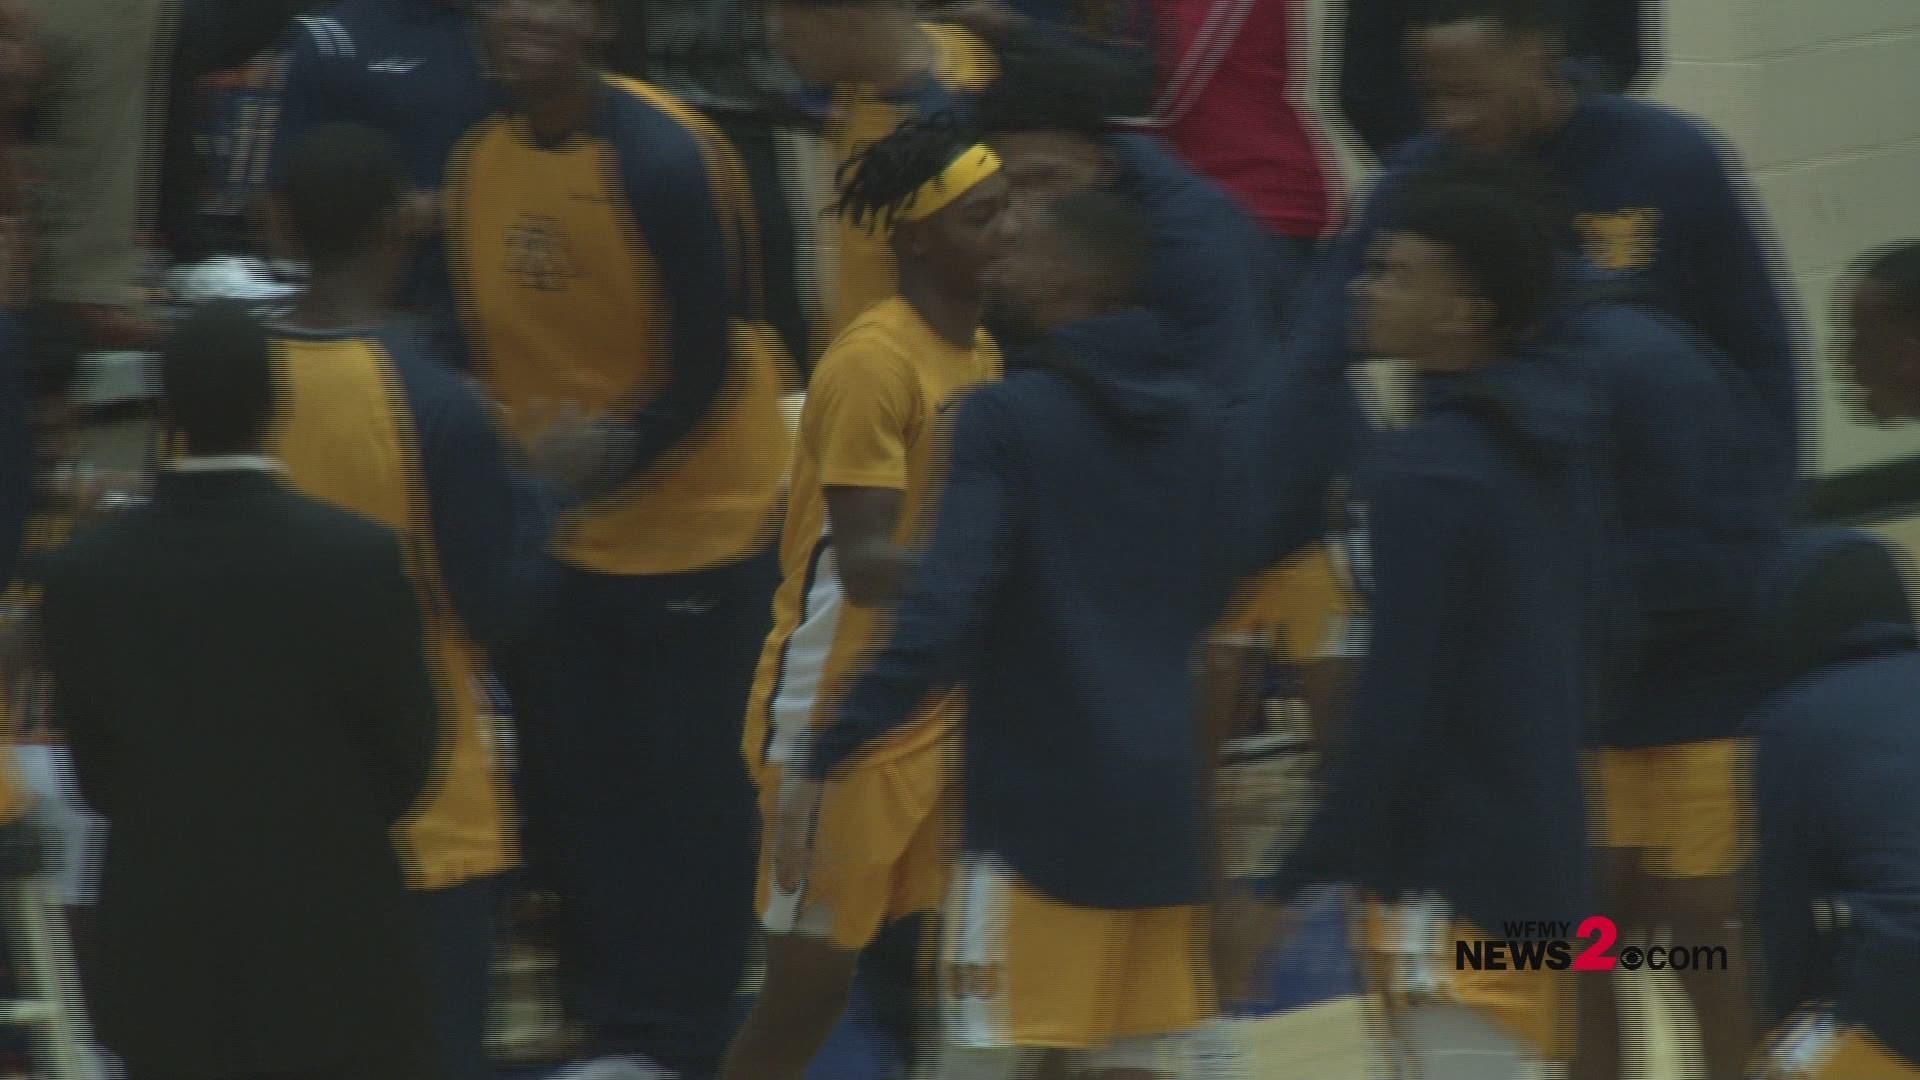 First-half highlights from UNCG's showdown with North Carolina A&T at the Corbett Sports Center in Greensboro.